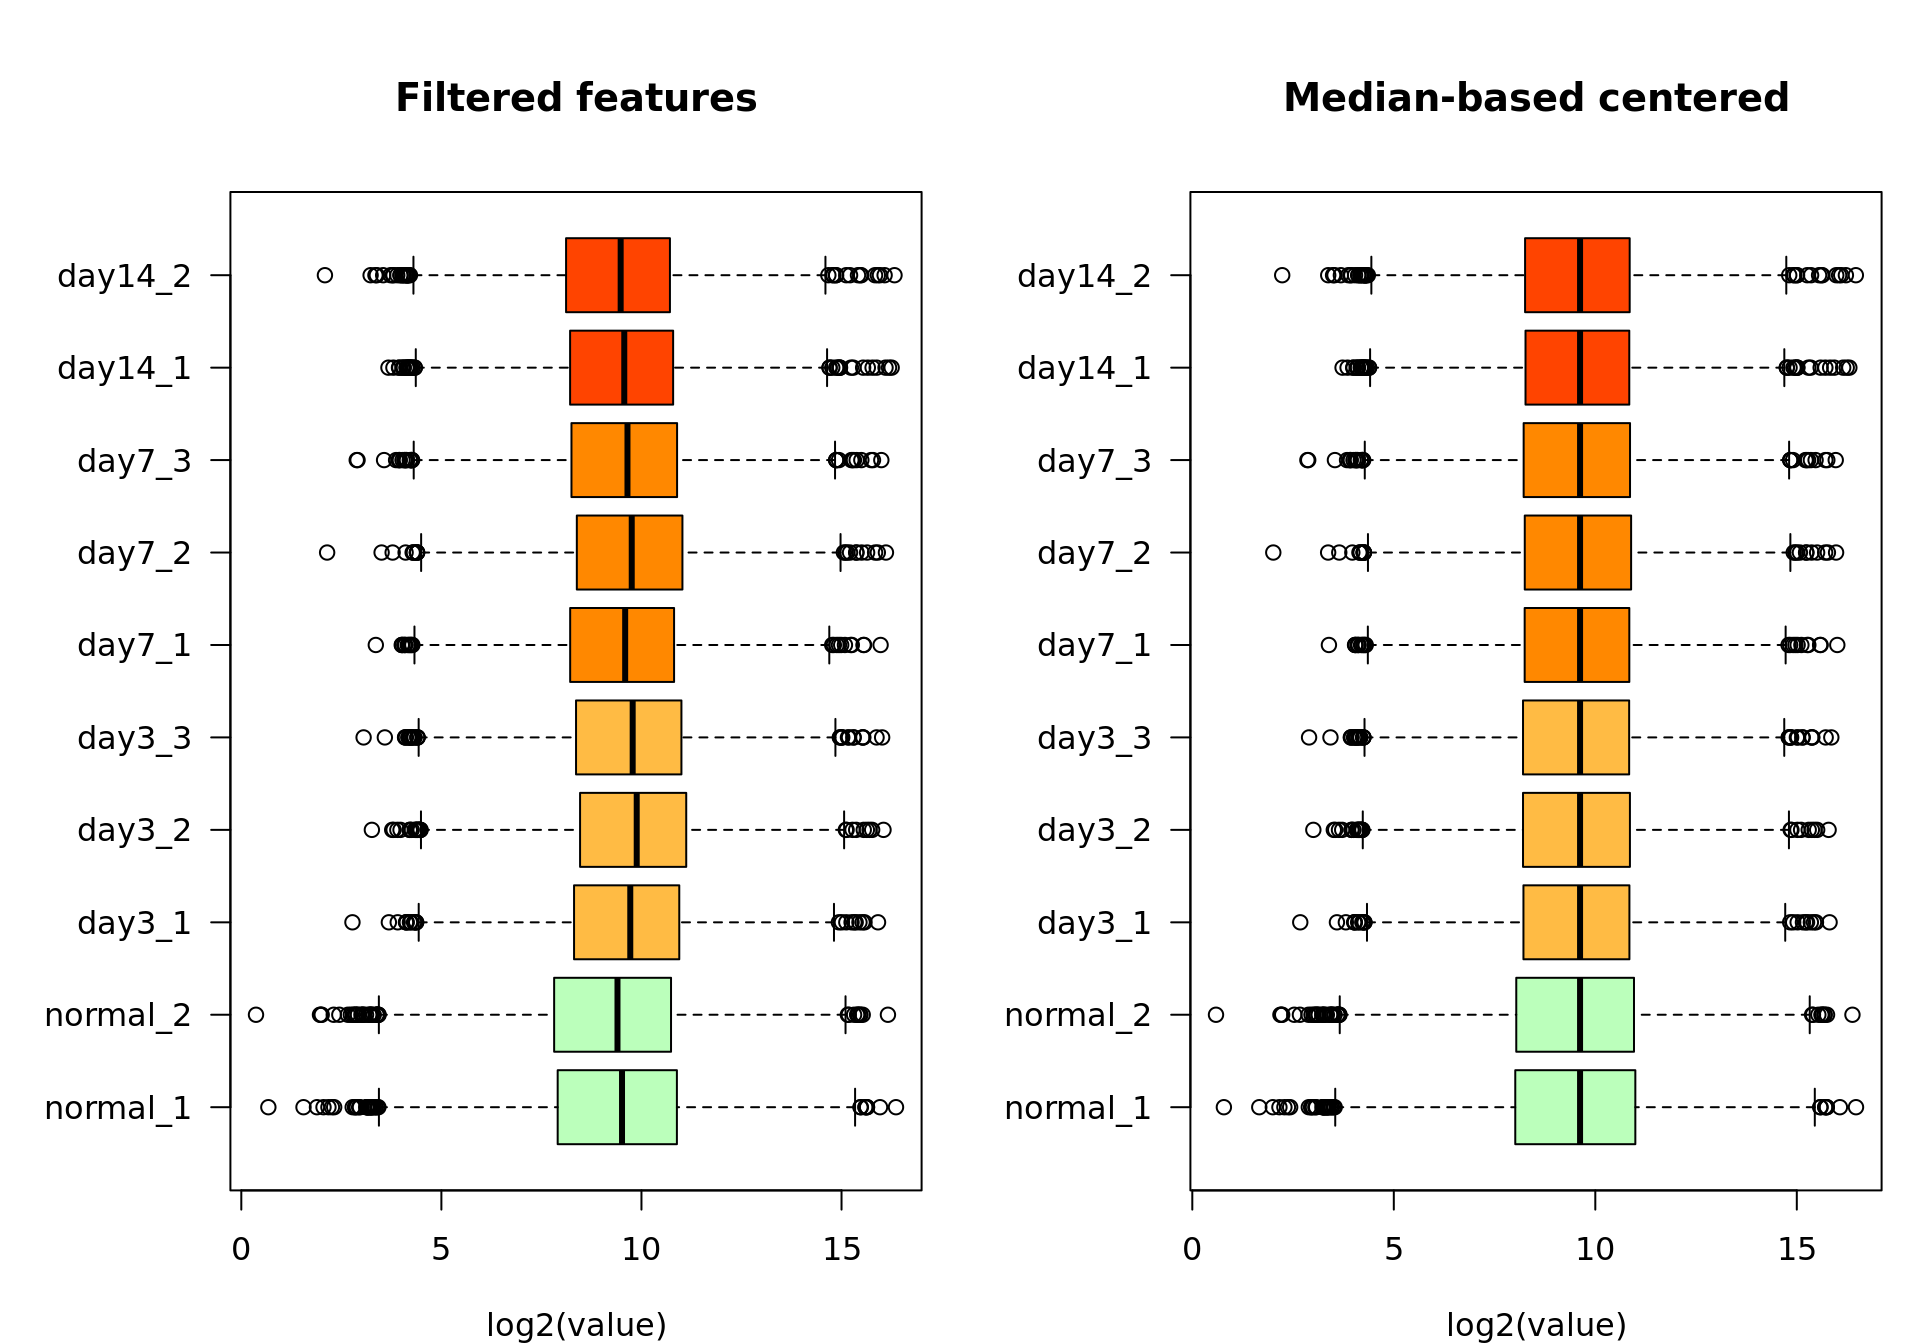 Box plot of the log2-transformed feature-filtered values before (left) and after (right) median-based standardization.  